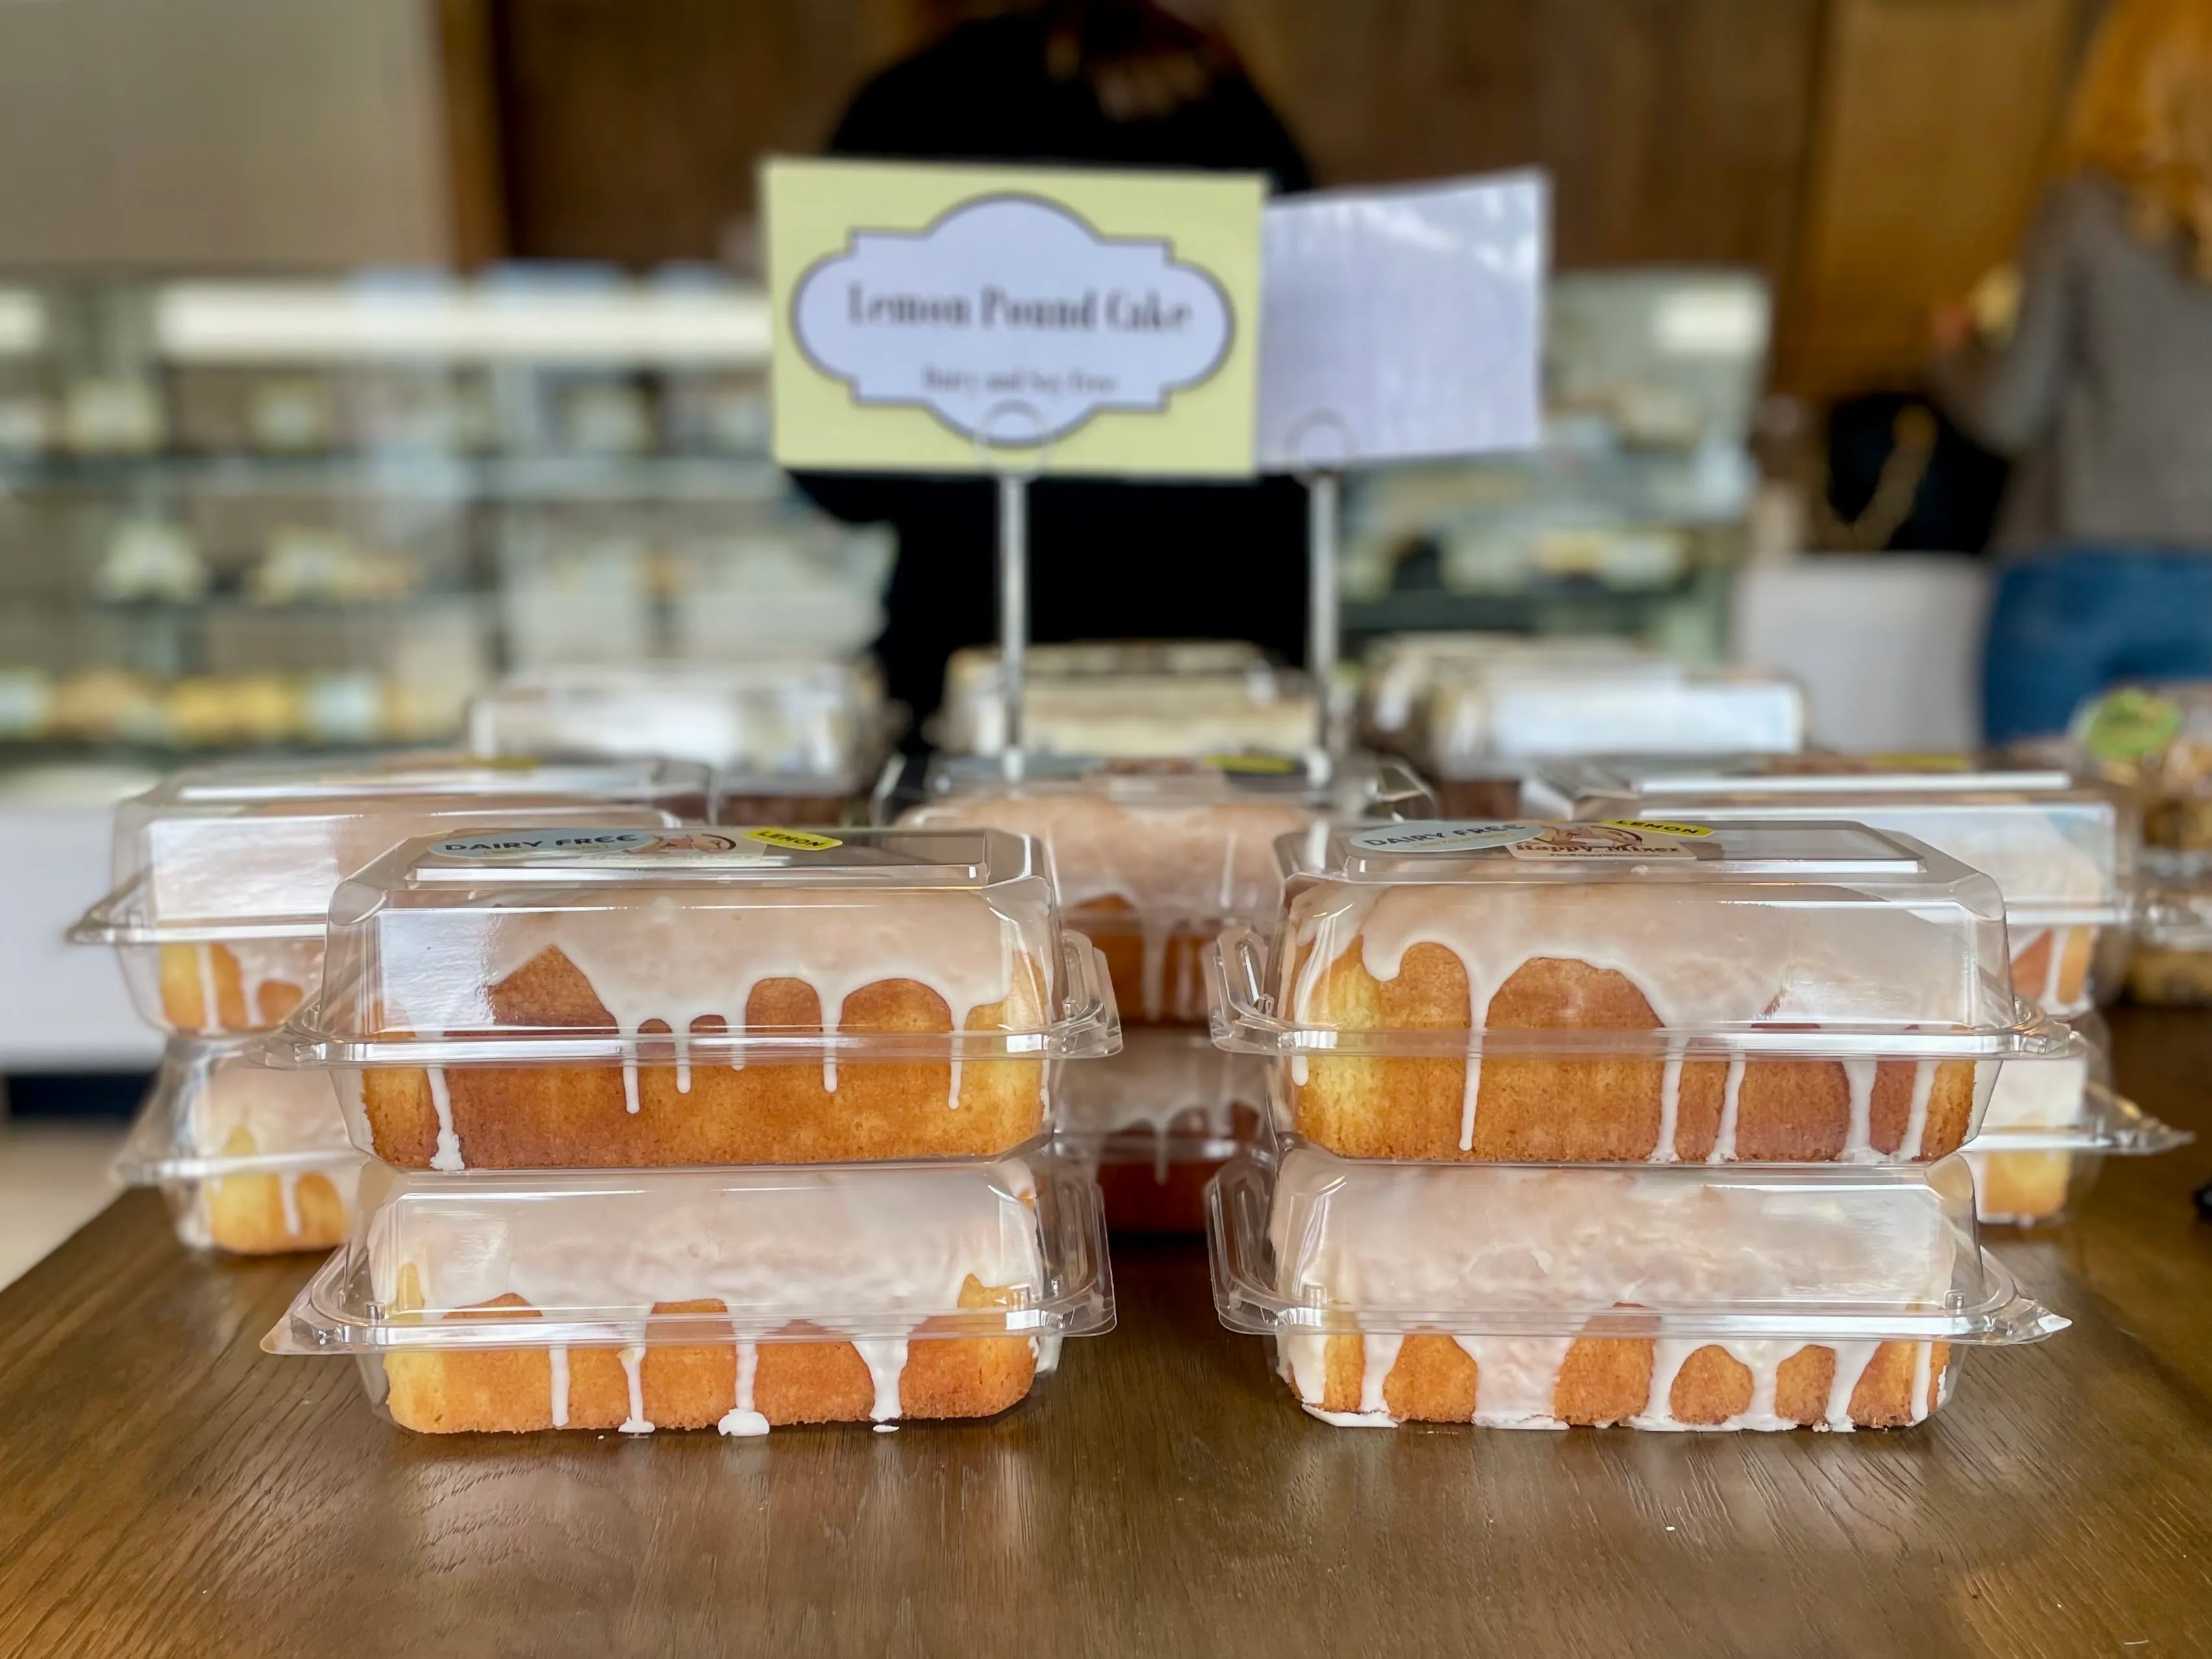 The moist lemon pound cake at the Happy Mixer Gluten Free Bakery in Wayne is one of the best-sellers at this local gluten-free bakery chain with three locations in Philadelphia's northwestern suburbs.